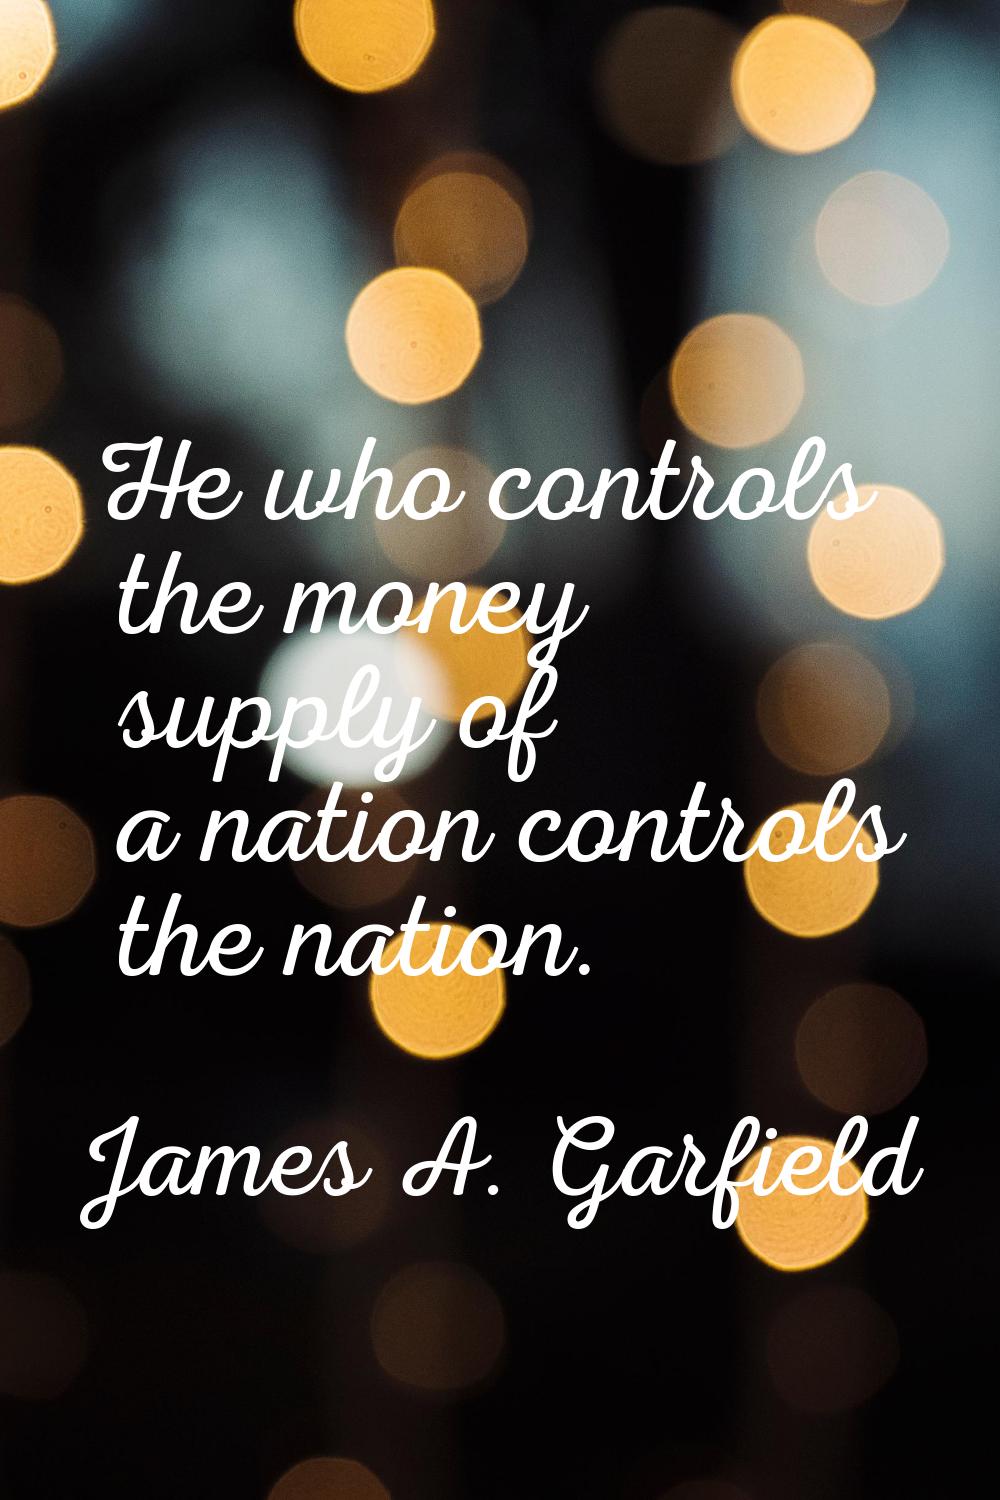 He who controls the money supply of a nation controls the nation.